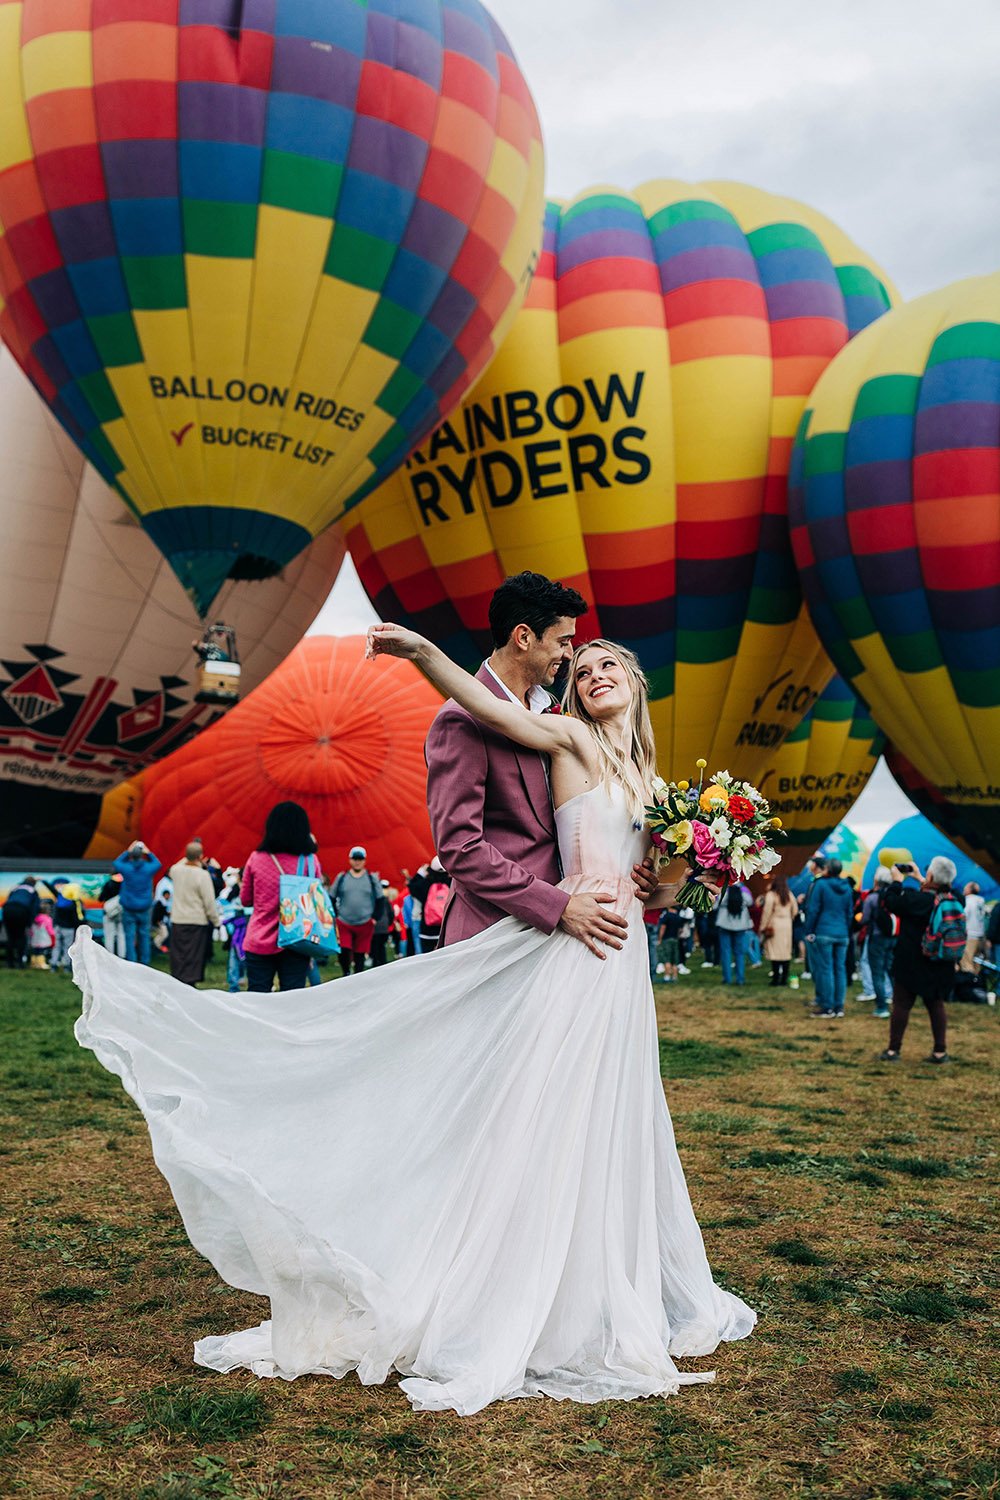 A woman tosses the end of her wedding dress while her husband holds her in front of hot air balloons.